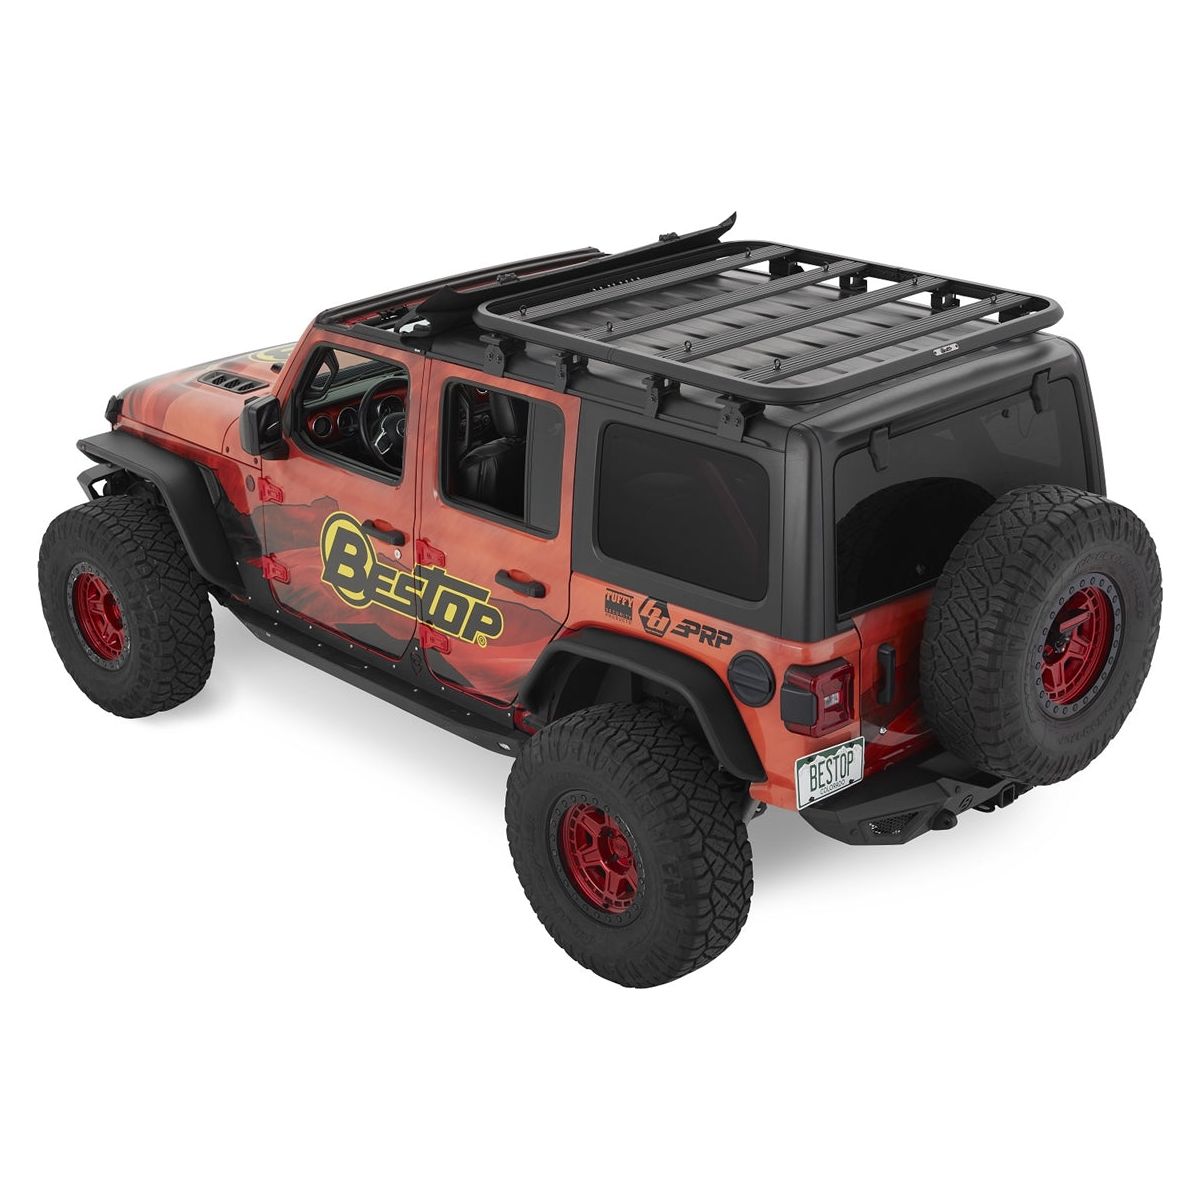 2018 Jeep Wrangler JL - Hard Top Support, Roof Rack and Cargo Box - Rhino  Rack / Thule